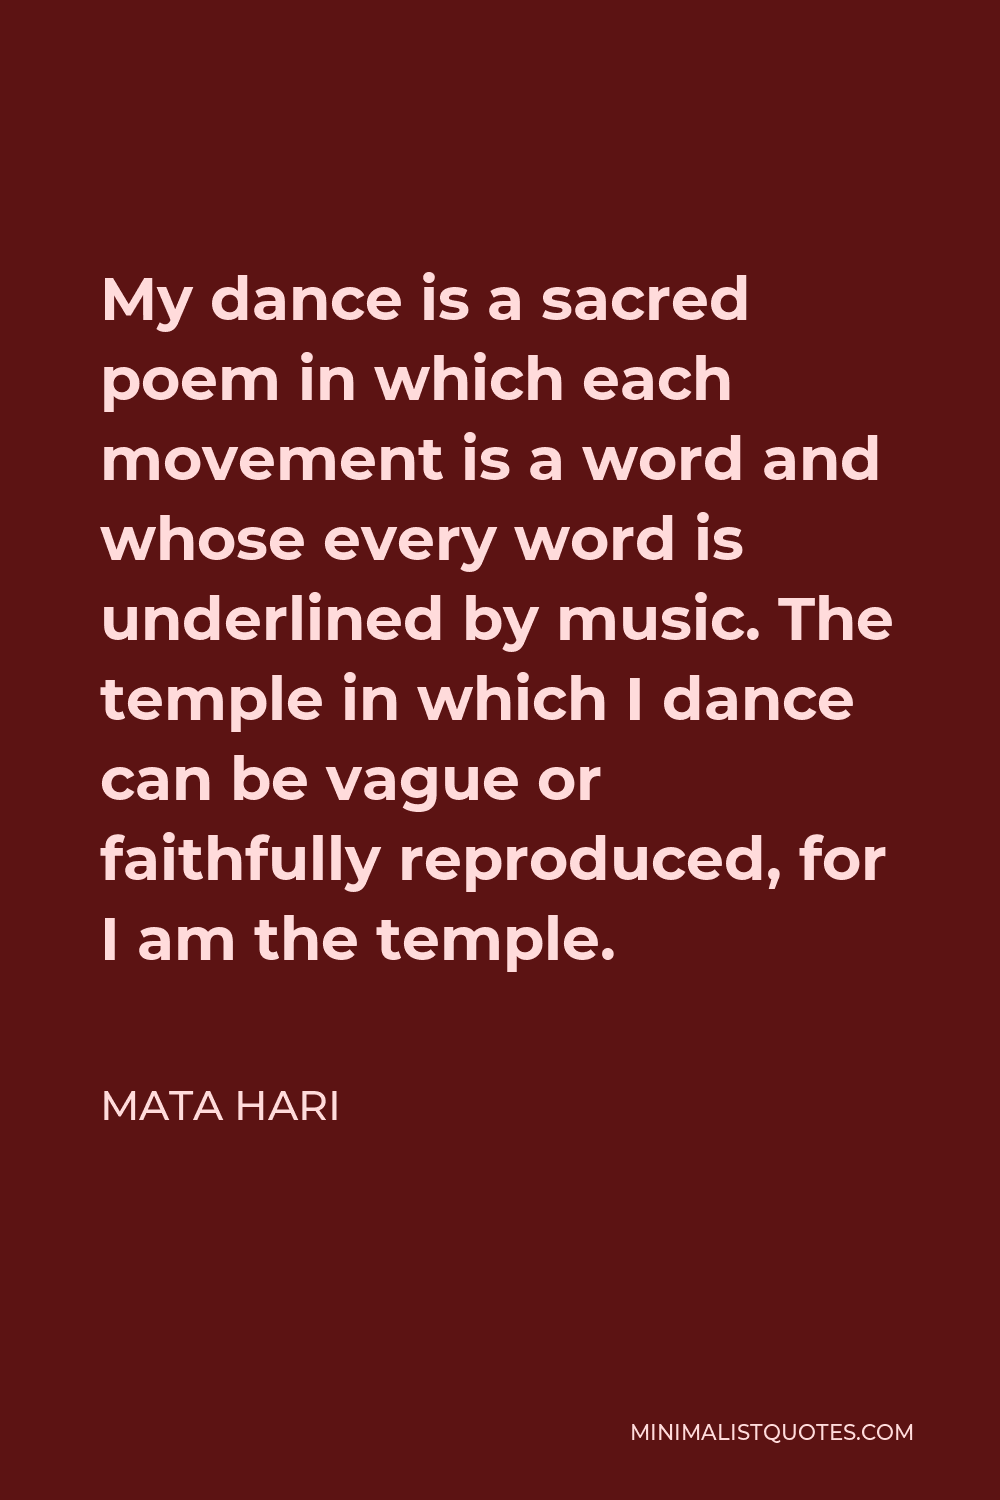 Mata Hari Quote - My dance is a sacred poem in which each movement is a word and whose every word is underlined by music. The temple in which I dance can be vague or faithfully reproduced, for I am the temple.